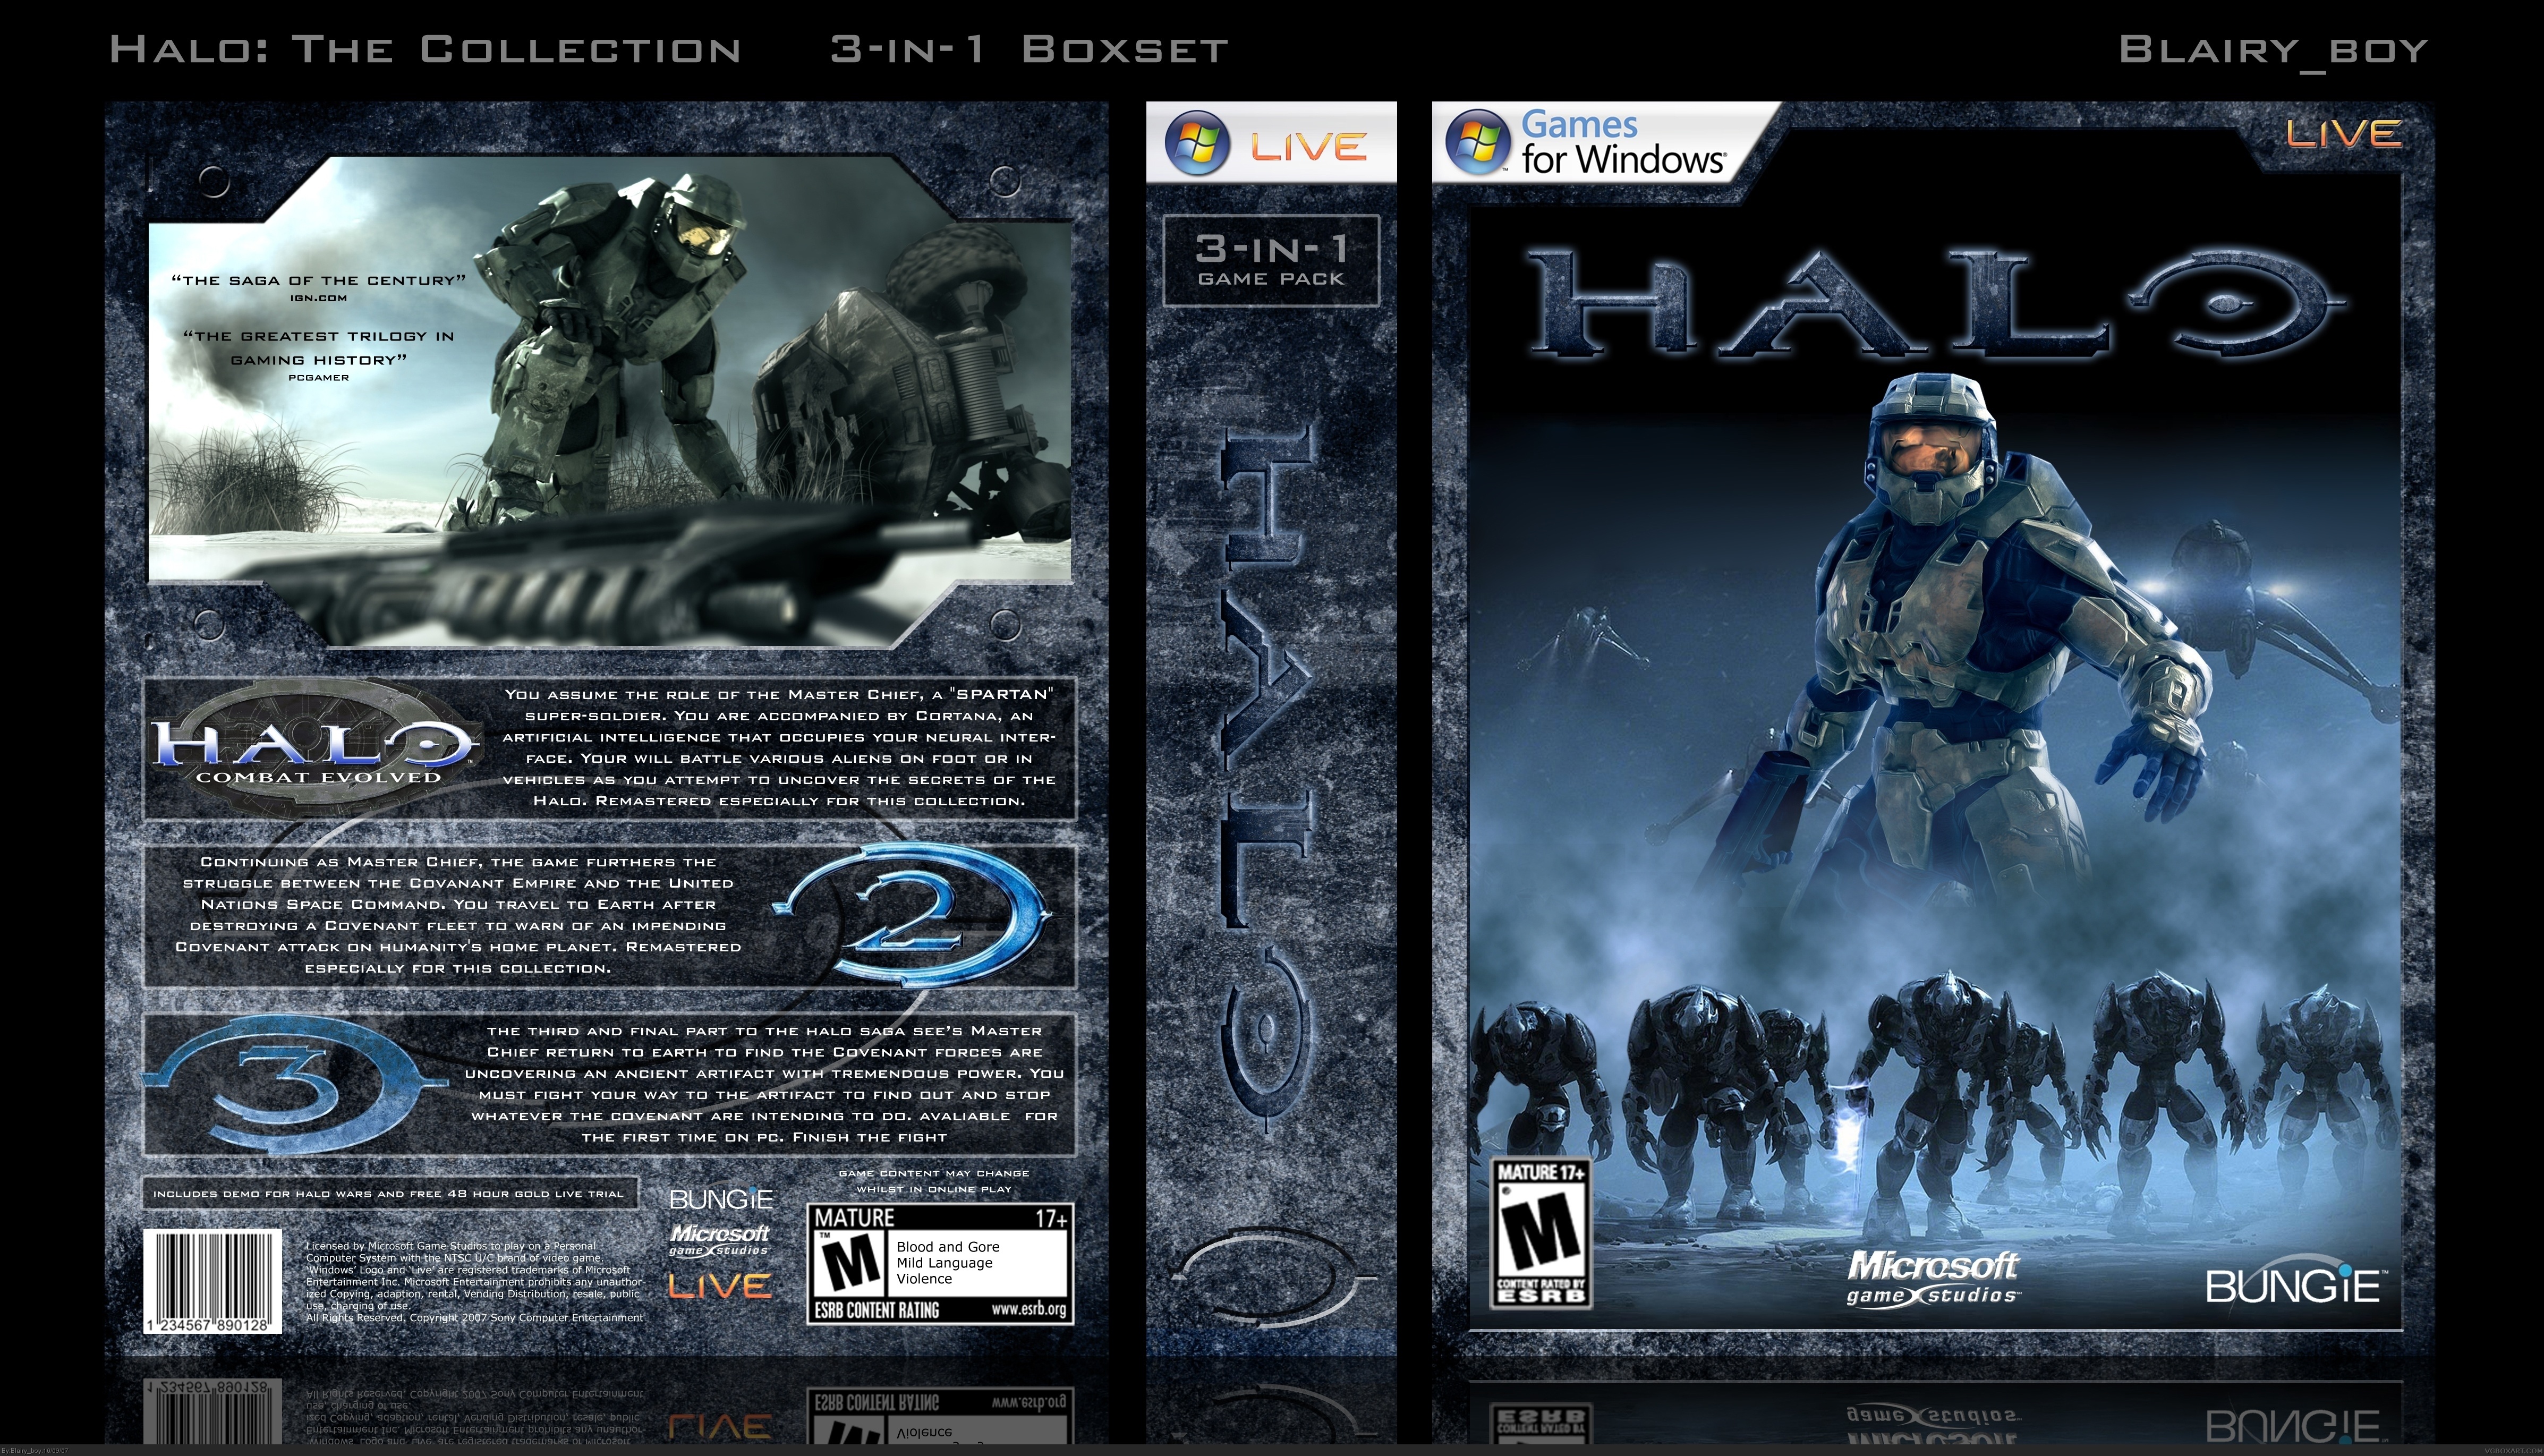 Halo: The Collection box cover